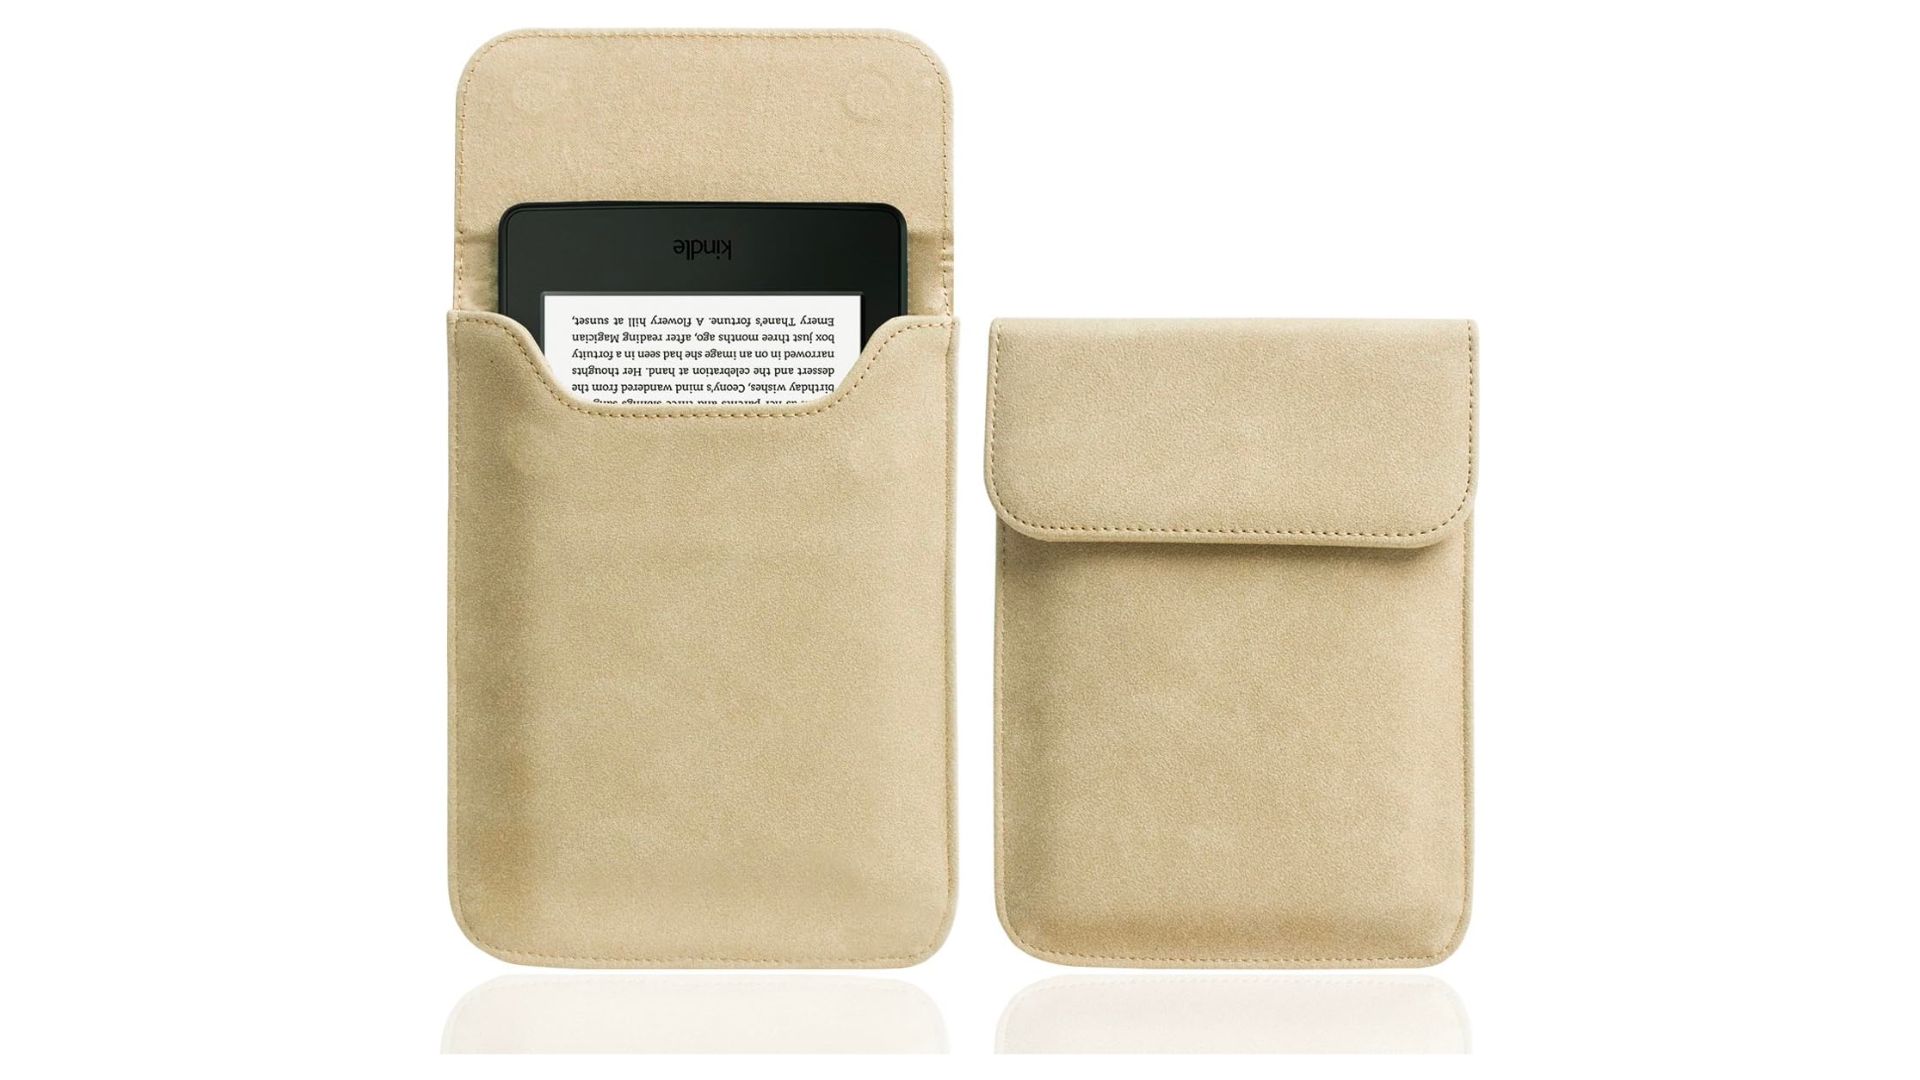 Best eReader covers for Kobo and Kindle: Walnew